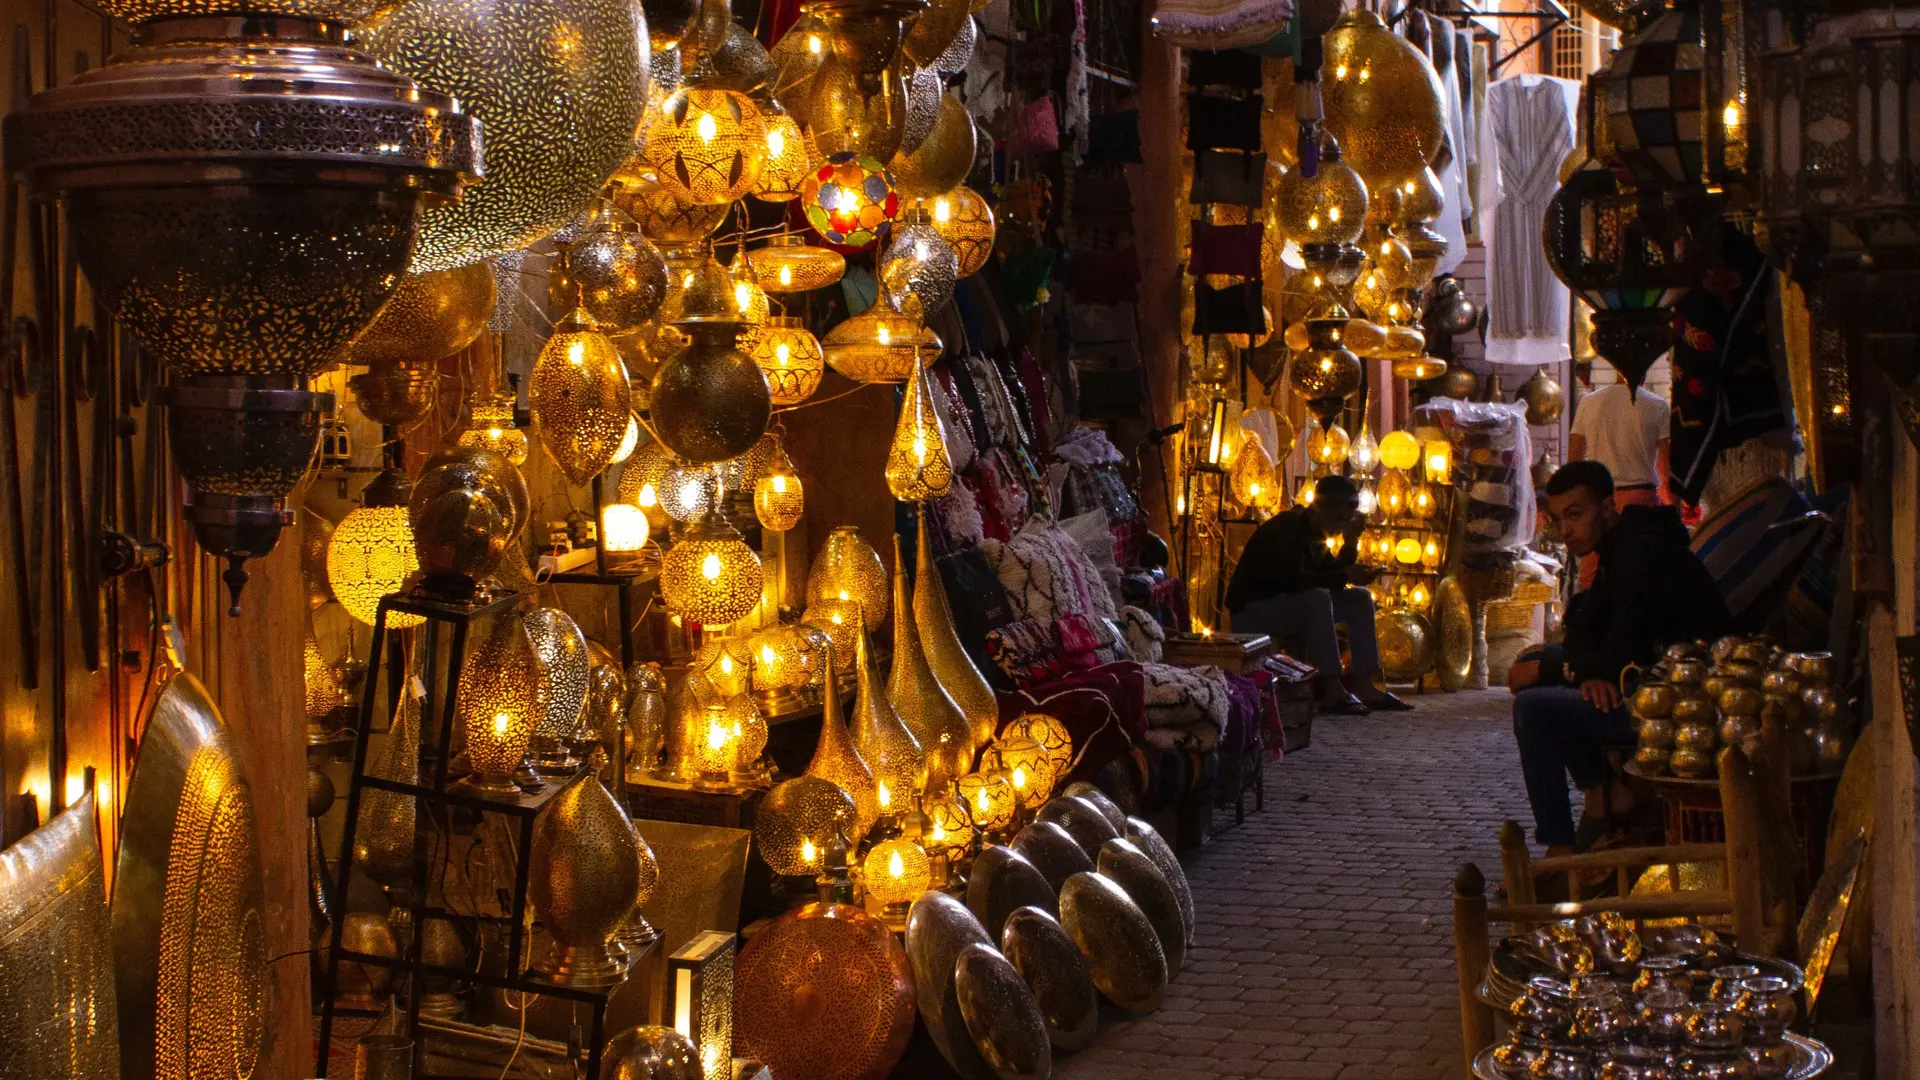 Moroccan market with man y lamps and lanterns with two people sitting.